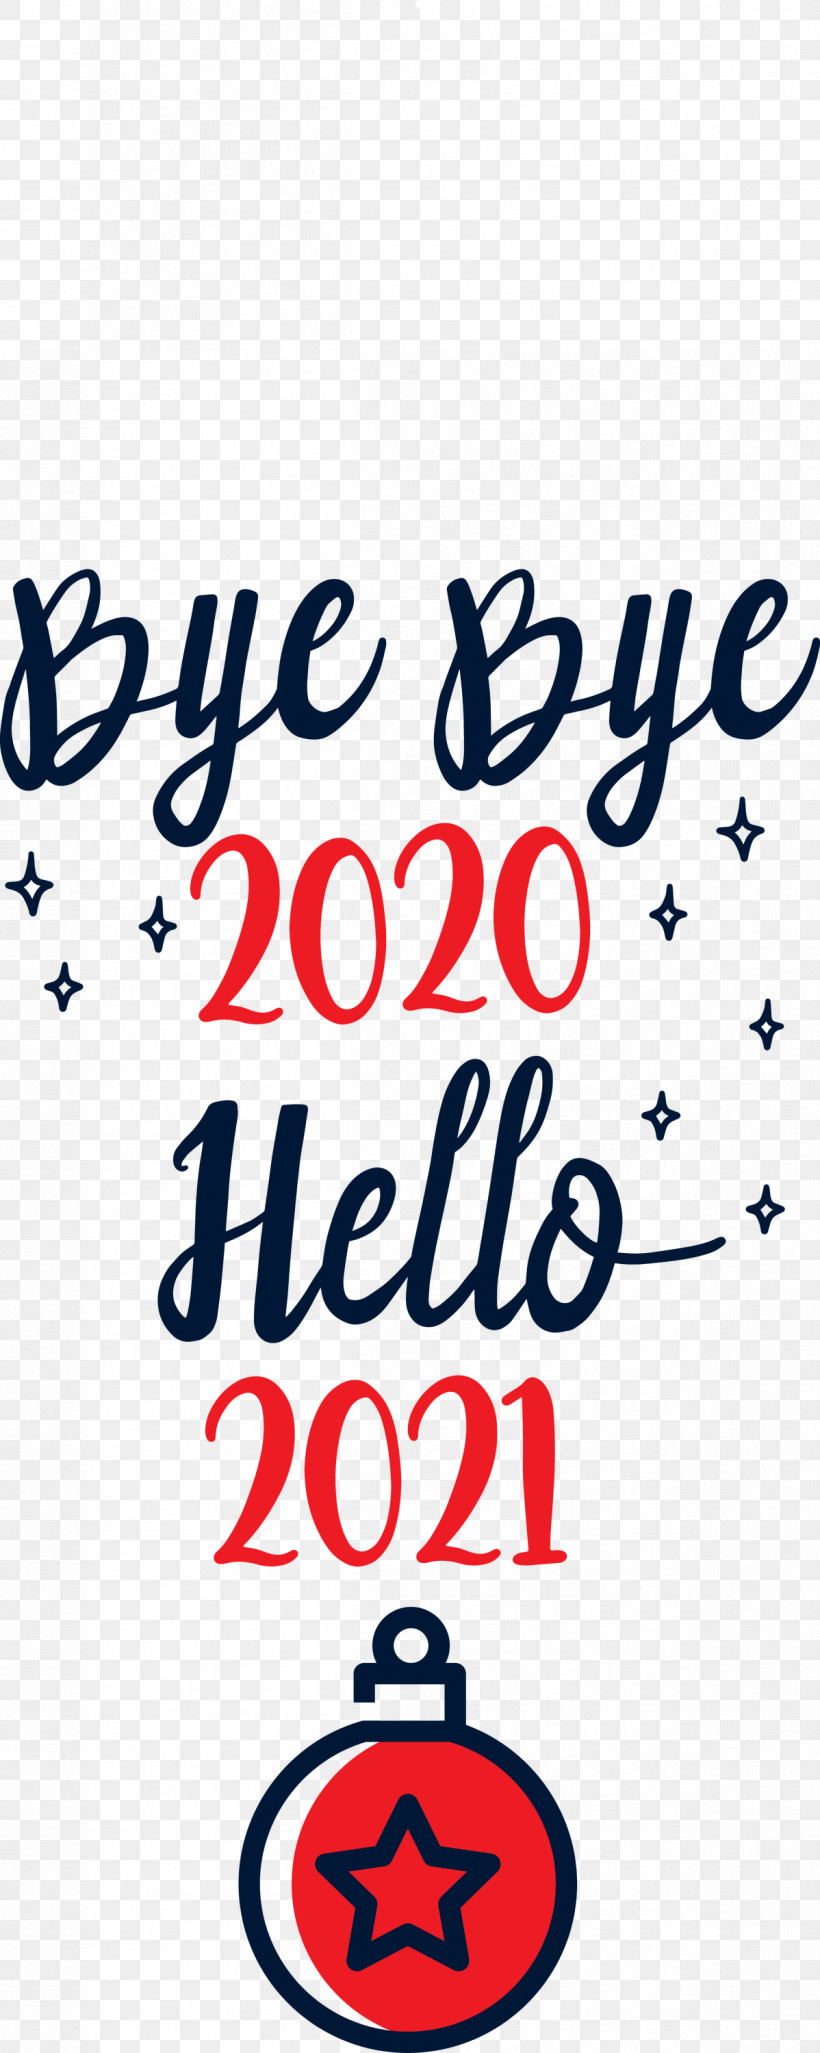 Hello 2021 Year Bye Bye 2020 Year, PNG, 1198x3000px, Hello 2021 Year, Bye Bye 2020 Year, Geometry, Happiness, Line Download Free